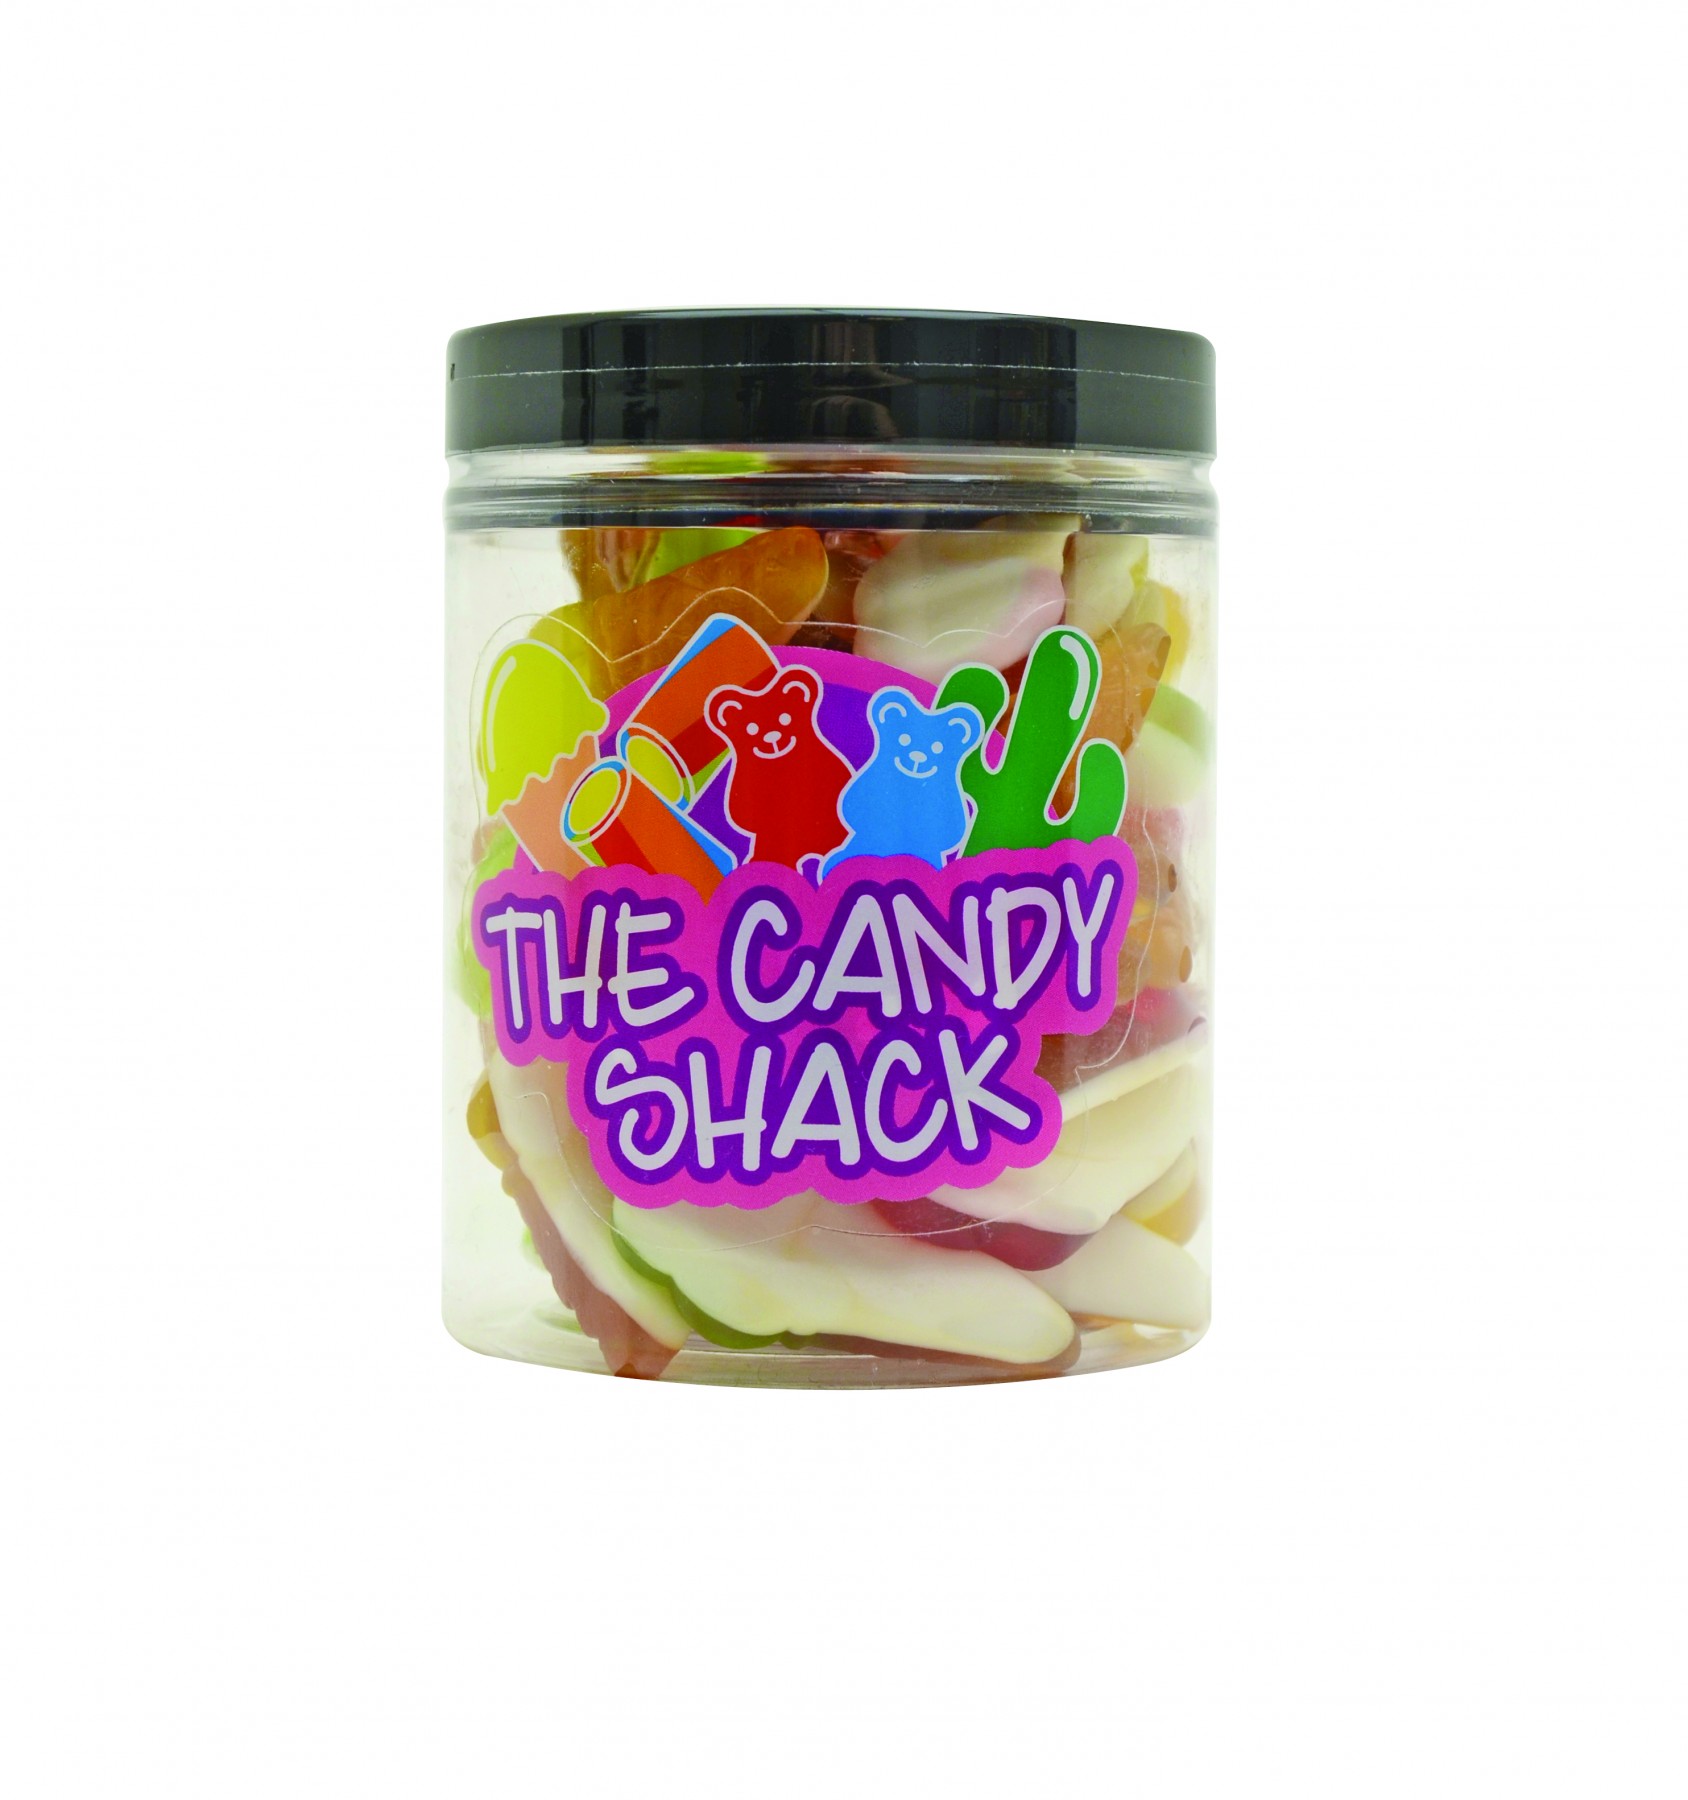 The Candy Shack Ice Cream Cone Gummy Jar Brands The Candy Shack Chocolates Direct 9016